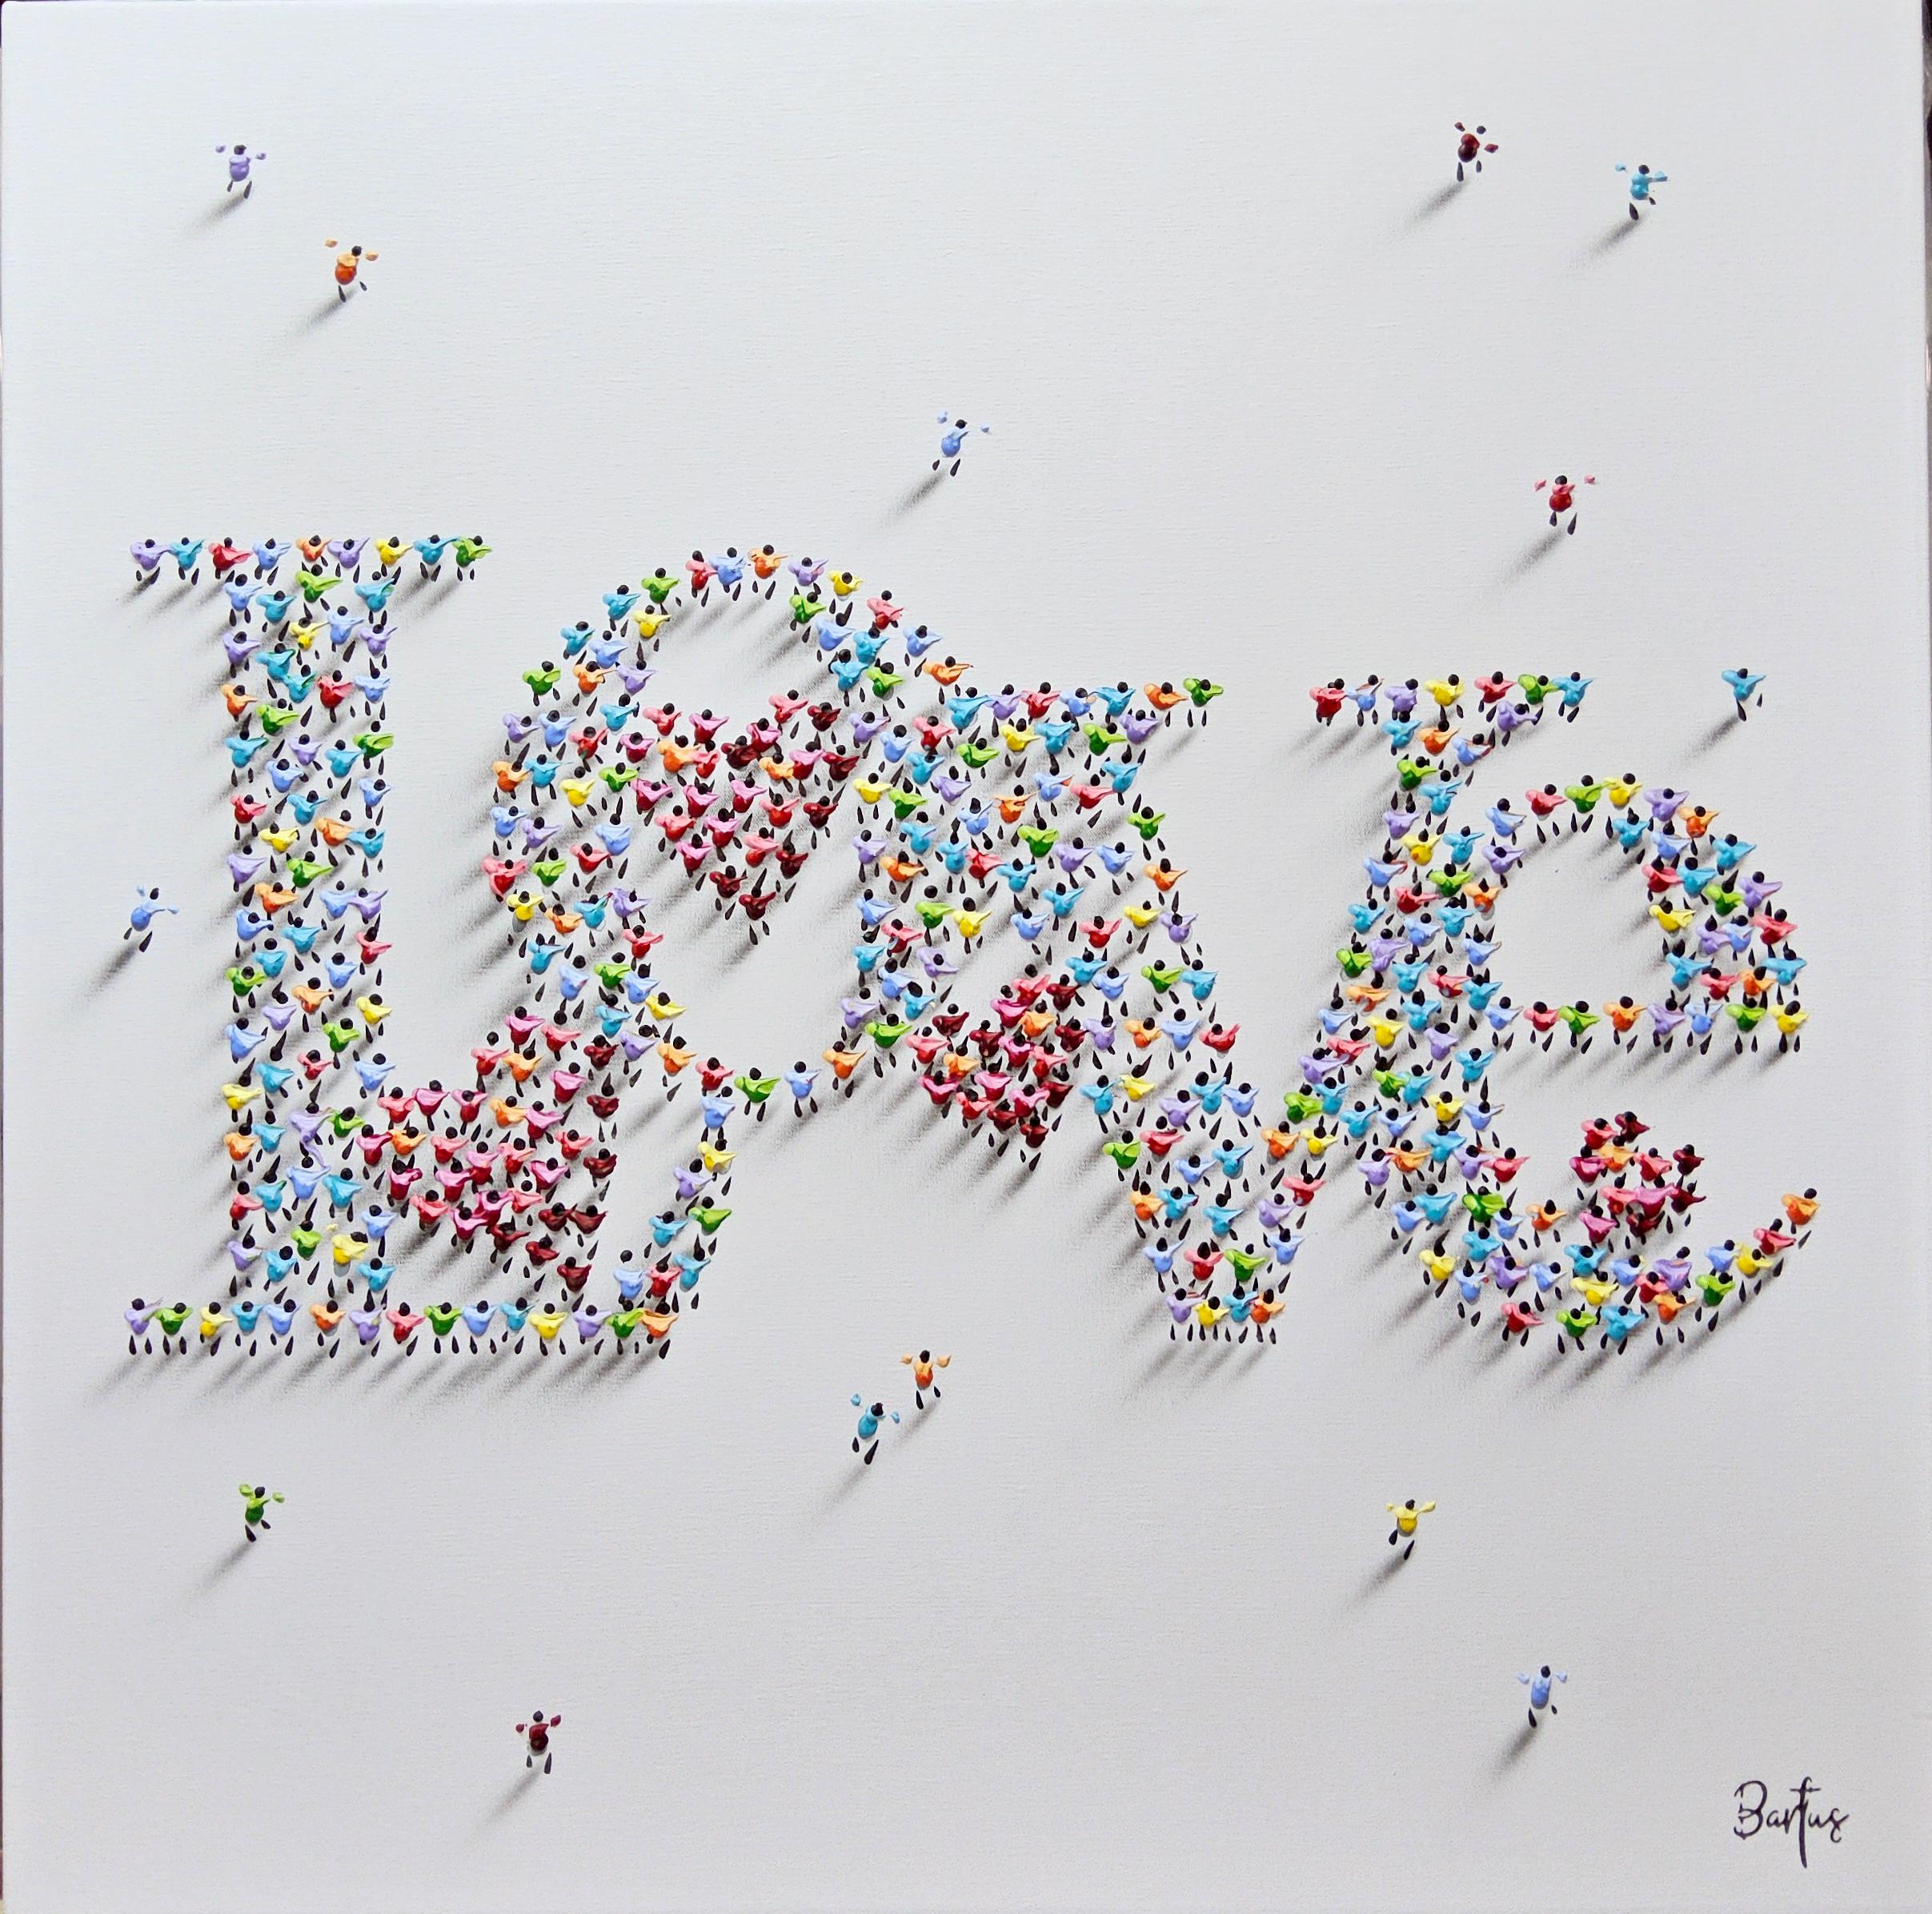 Francisco Bartus, "All You Need is Love", 32x32, Textured Mixed Media Painting 